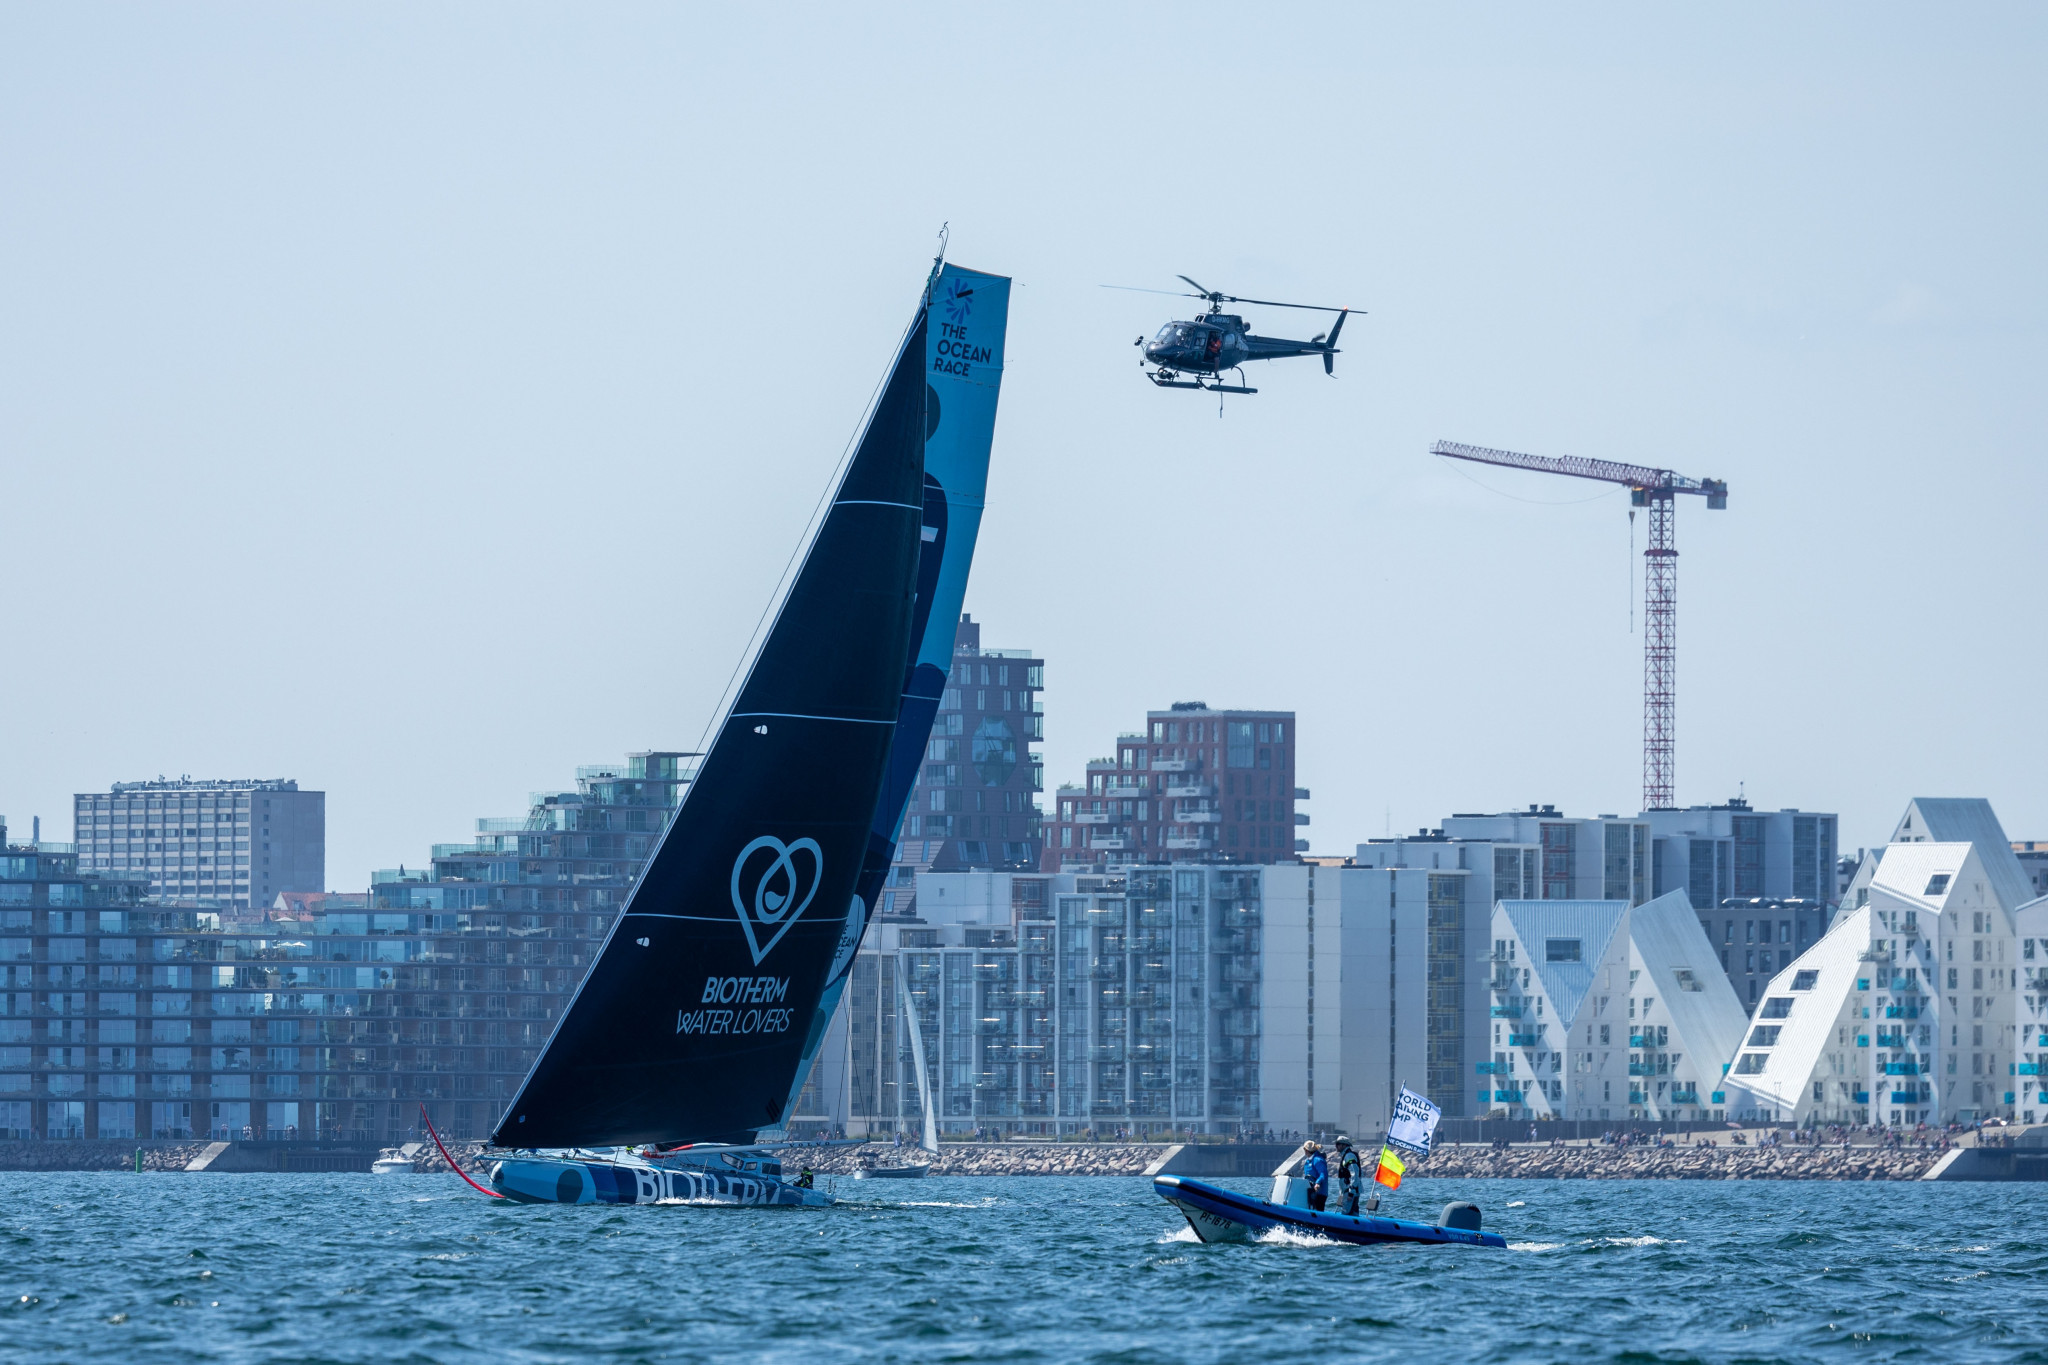 A helicopter tracks the IMOCA in-port race staged against the backdrop of Aarhus' stunning architecture ©Peter Broegger